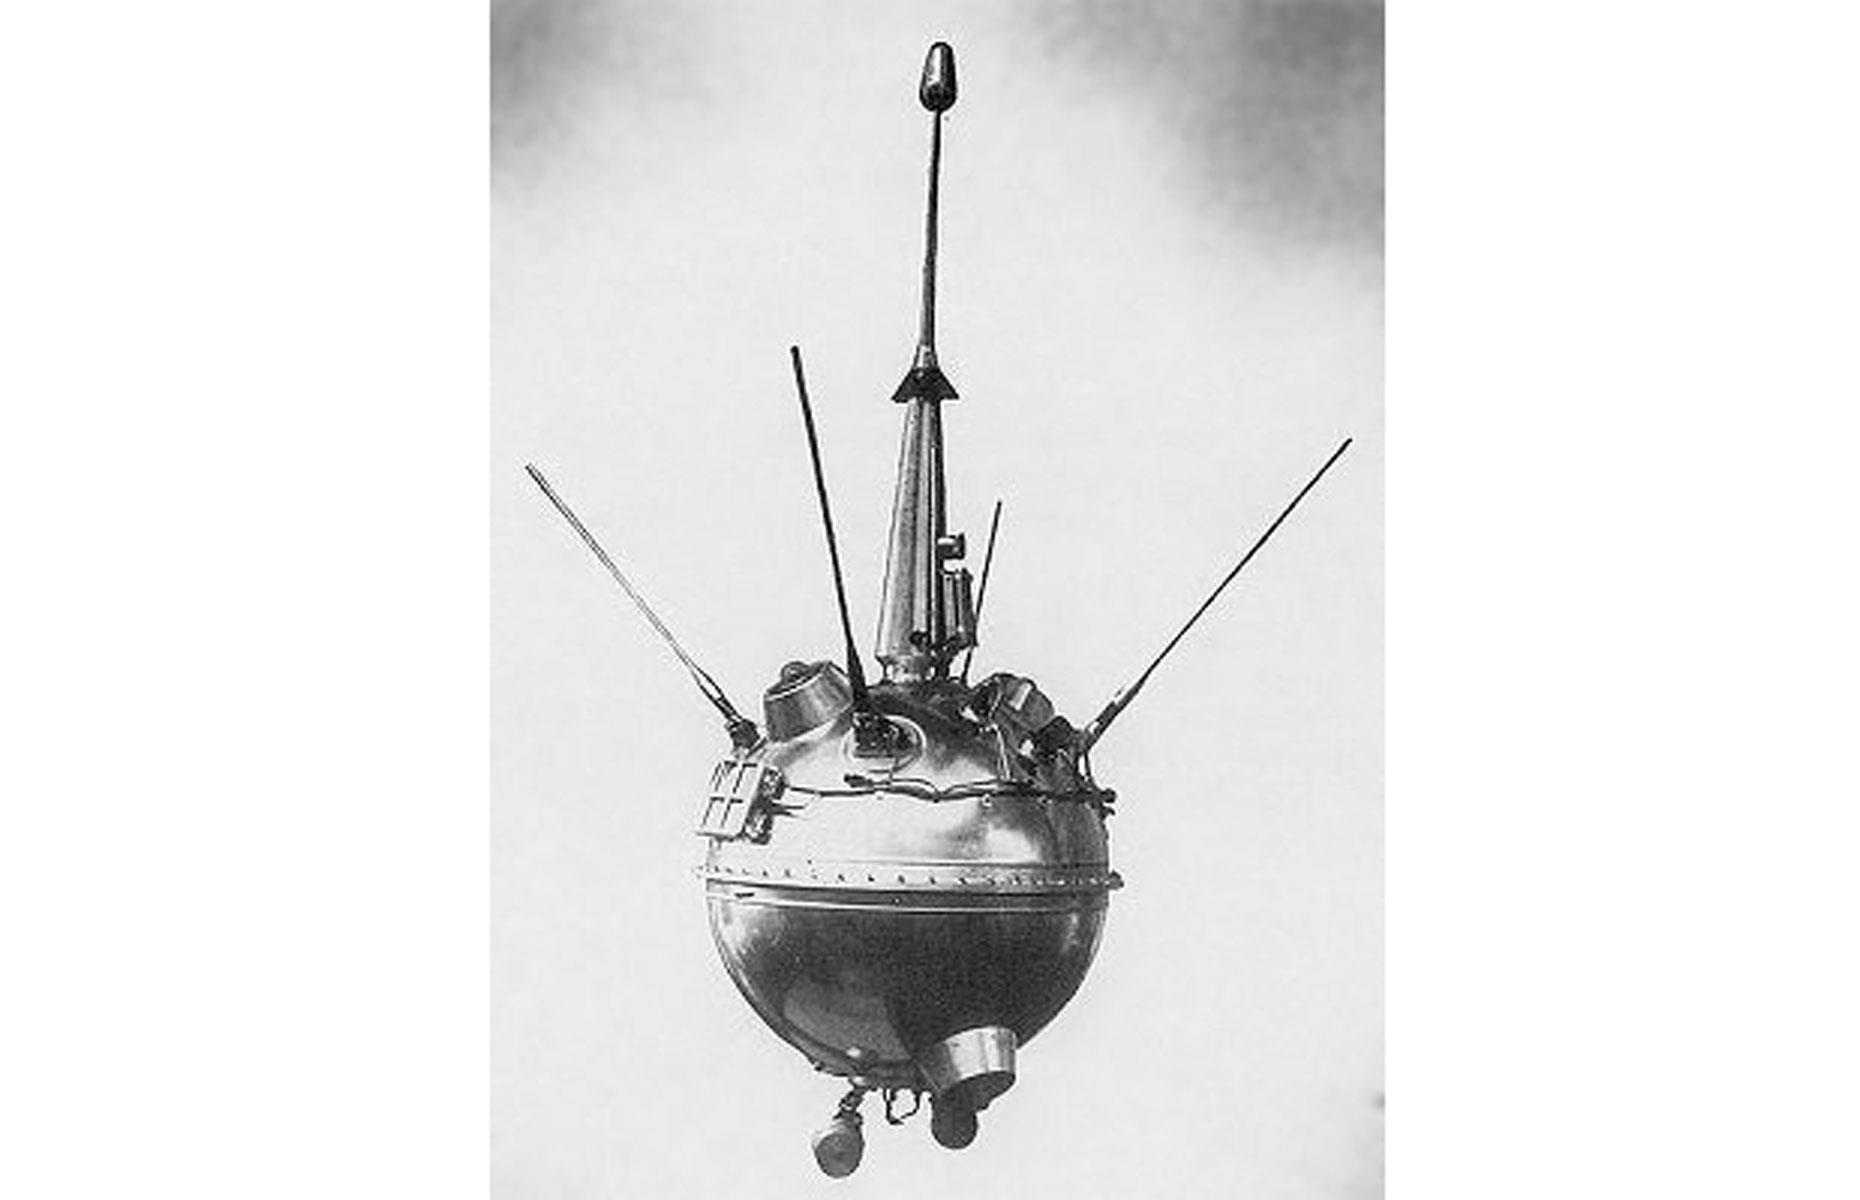 The first spacecraft to reach the surface of the Moon, the Soviet Luna 2 craft landed just east of the Mare Imbrium plain near the crater of Autolycus on 13 September 1959, and remains there to this day.